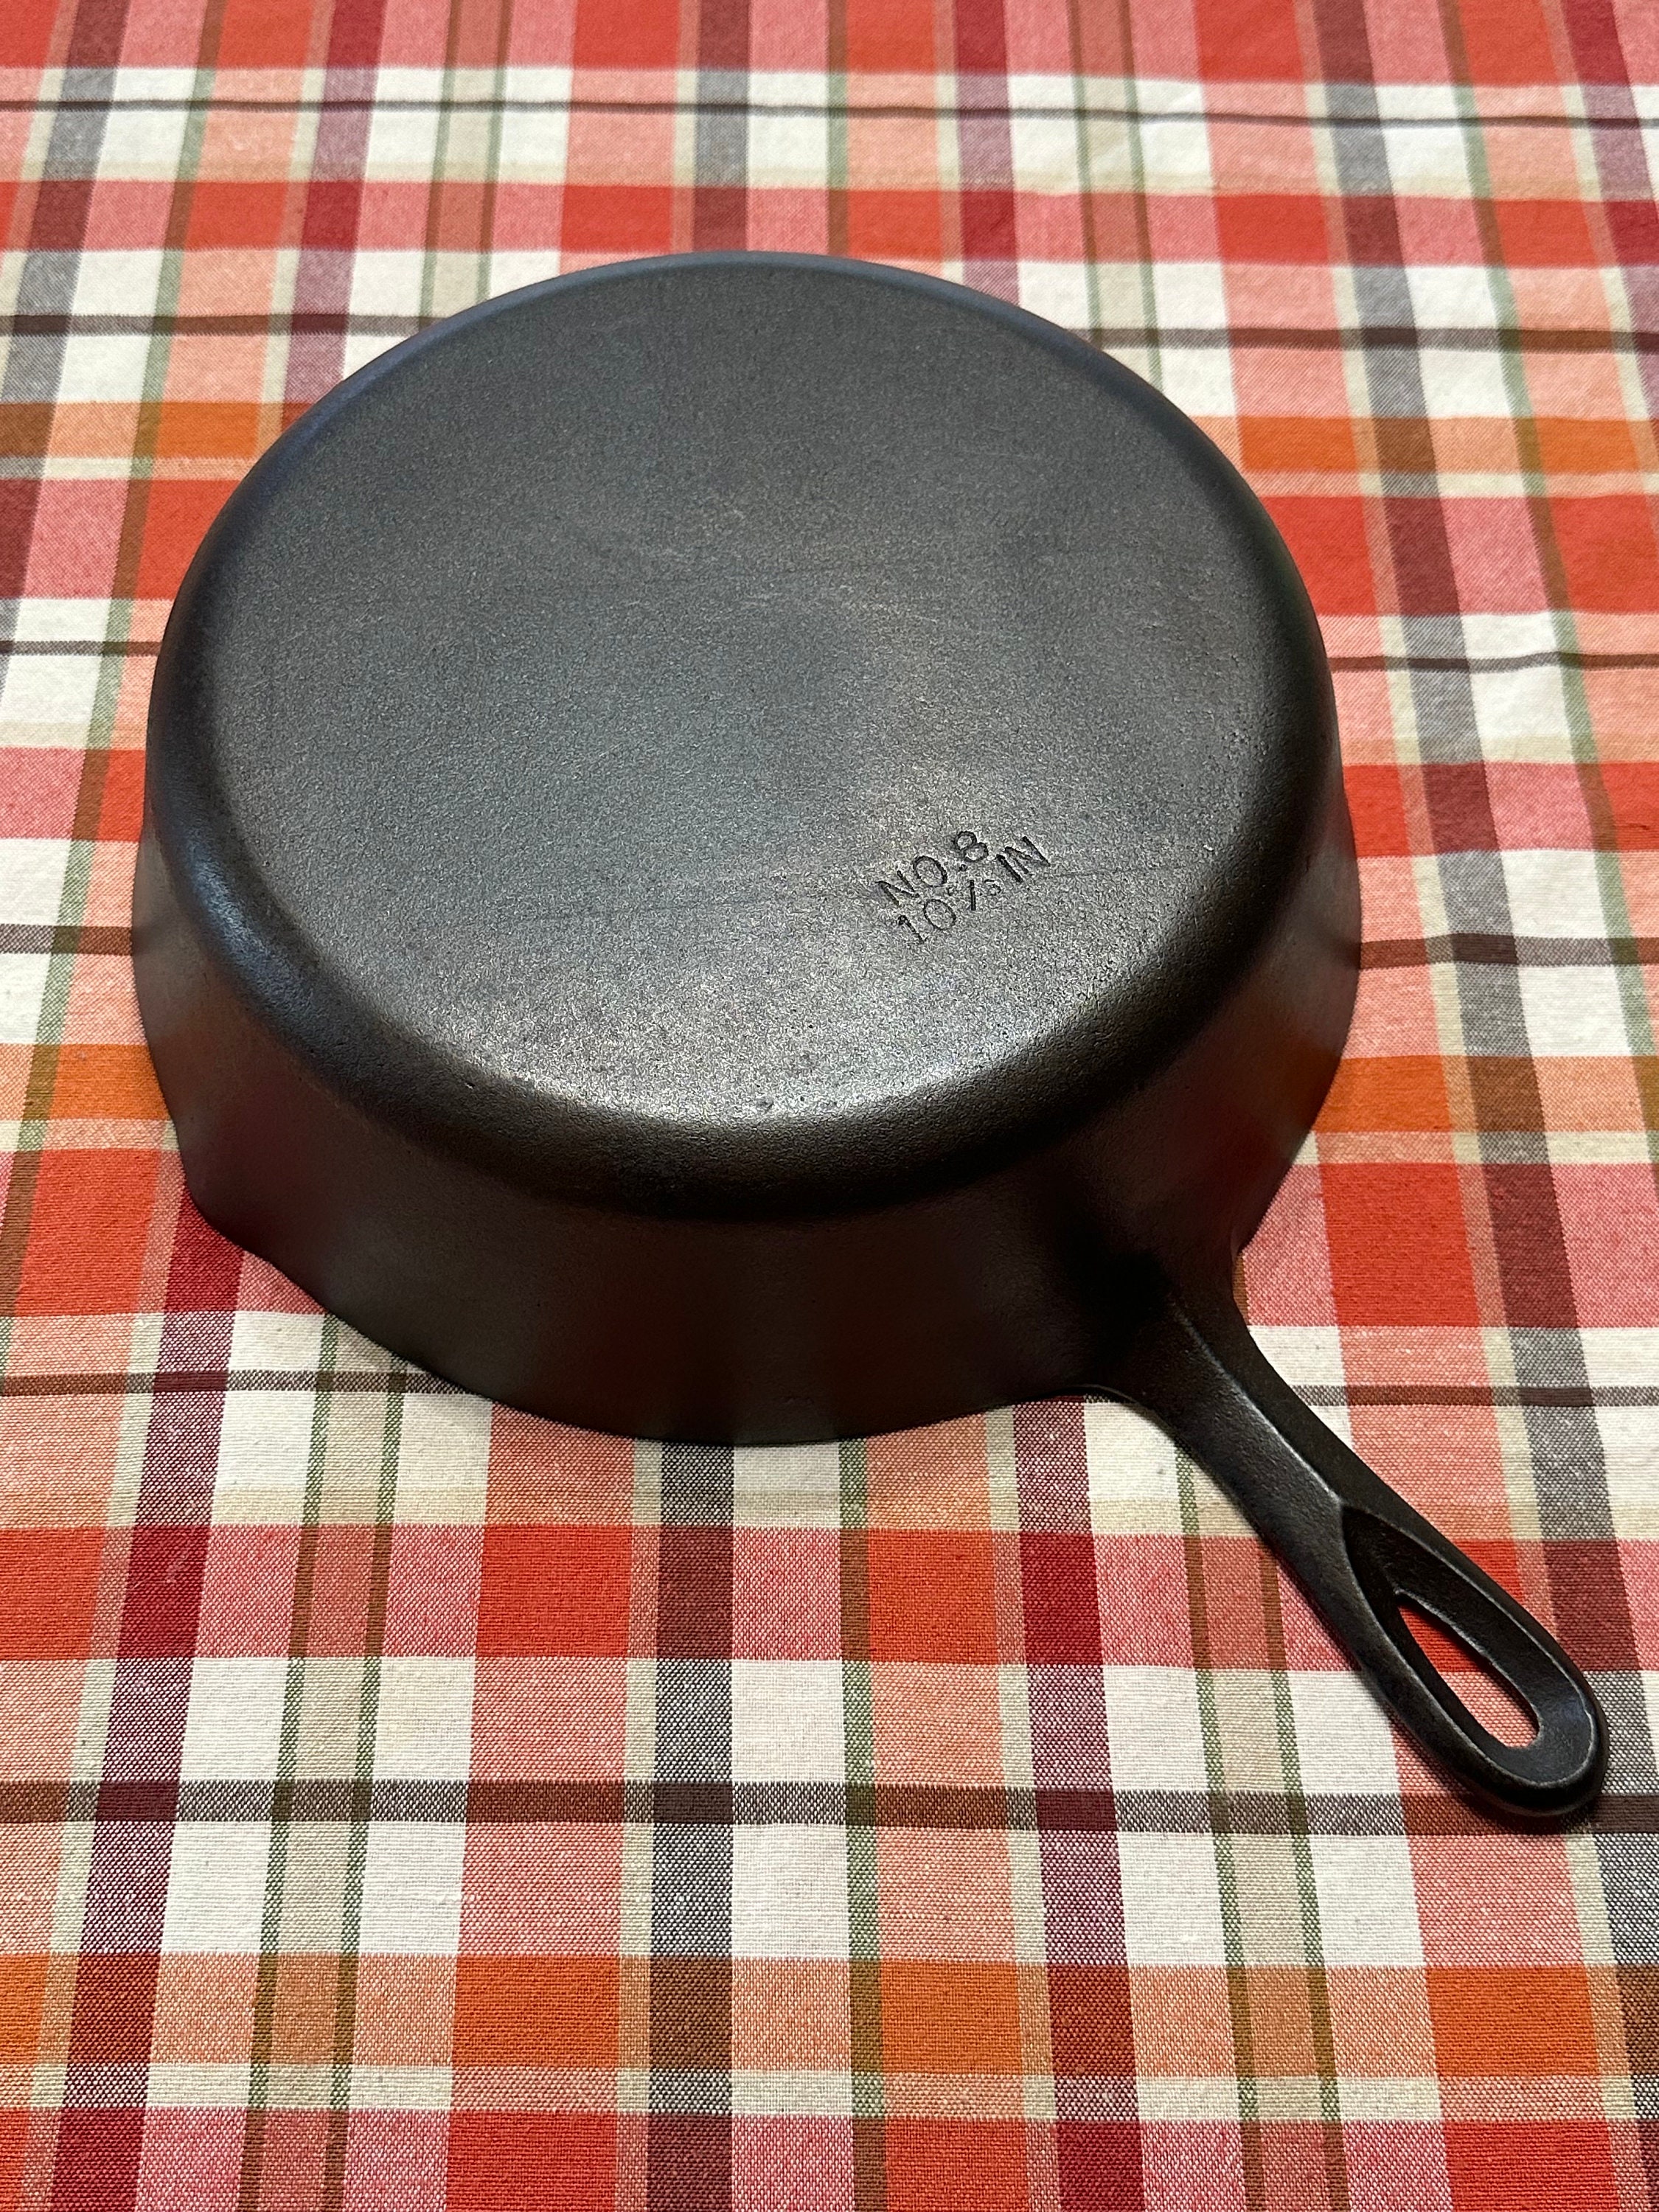 Antique Unmarked #5 8-Inch Cast Iron Skillet – Industrial Artifacts